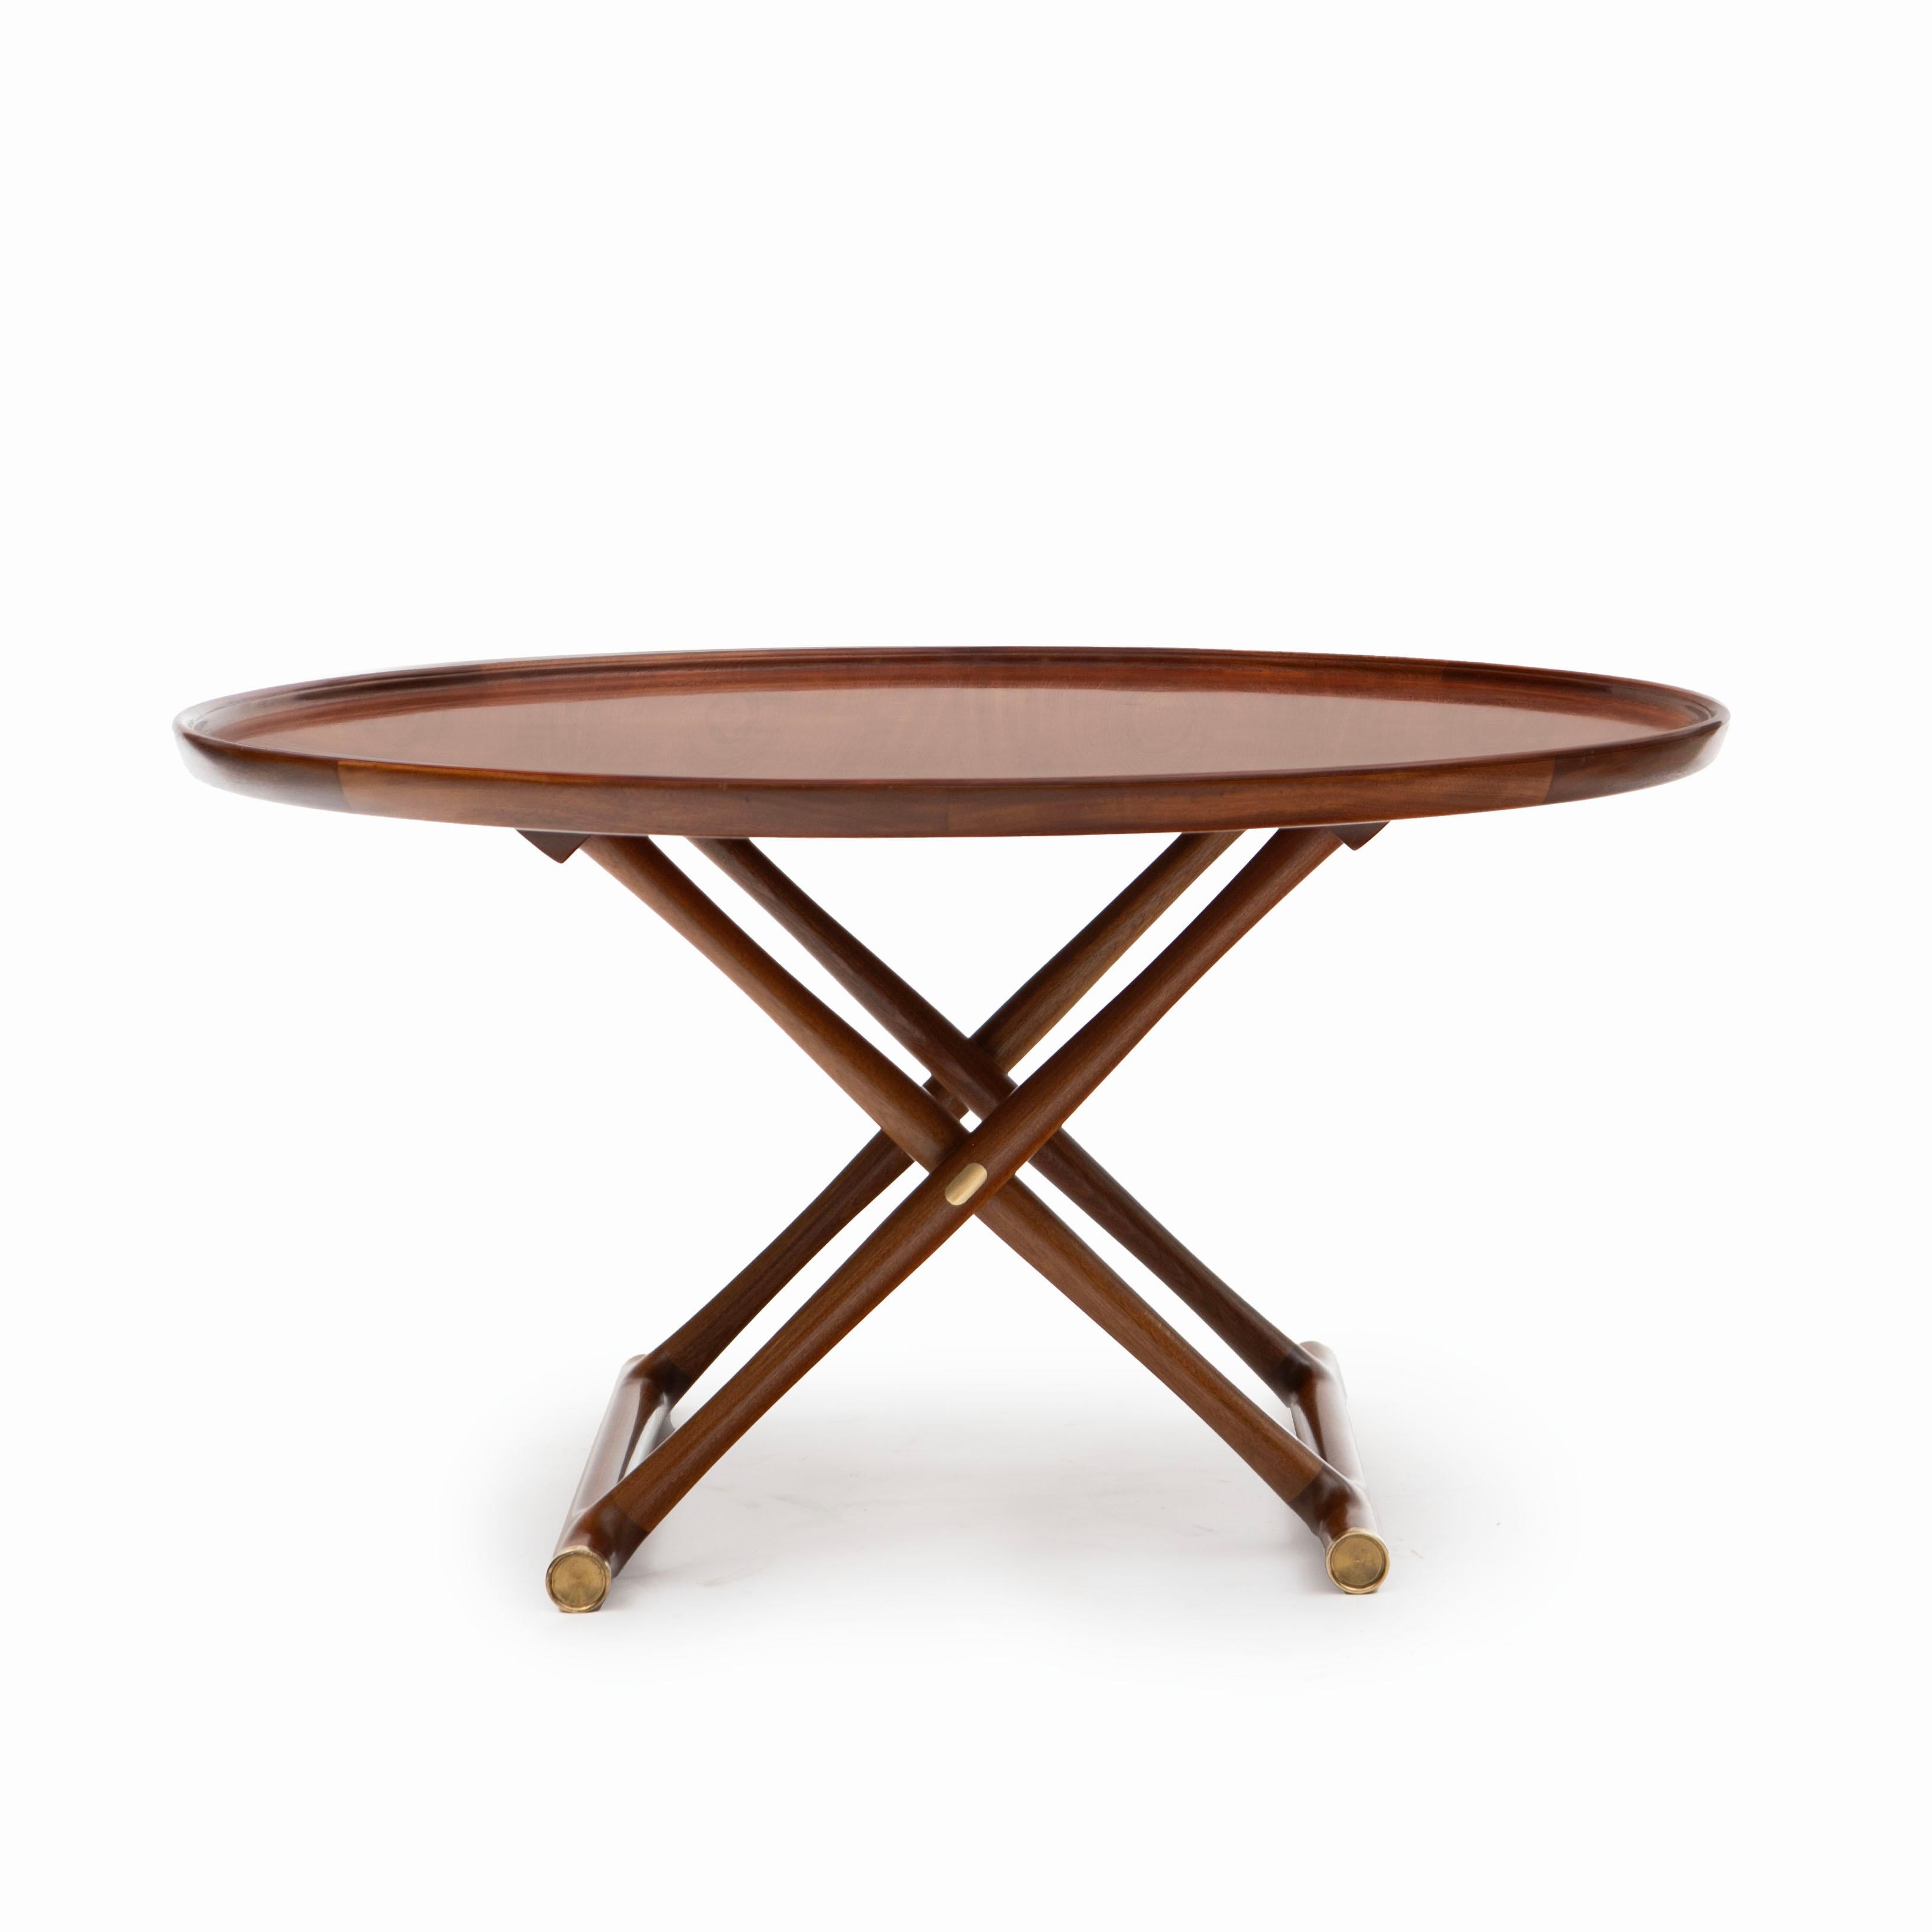 Mogens Lassen, Danish 1901-1987

Circular mahogany “Egyptian” folding occasional coffee table for A.J. Iversen, designed in 1935.
Foldable frame, top with raised edge and unusually beautiful grain. Beautiful details on feet in the form of brass end